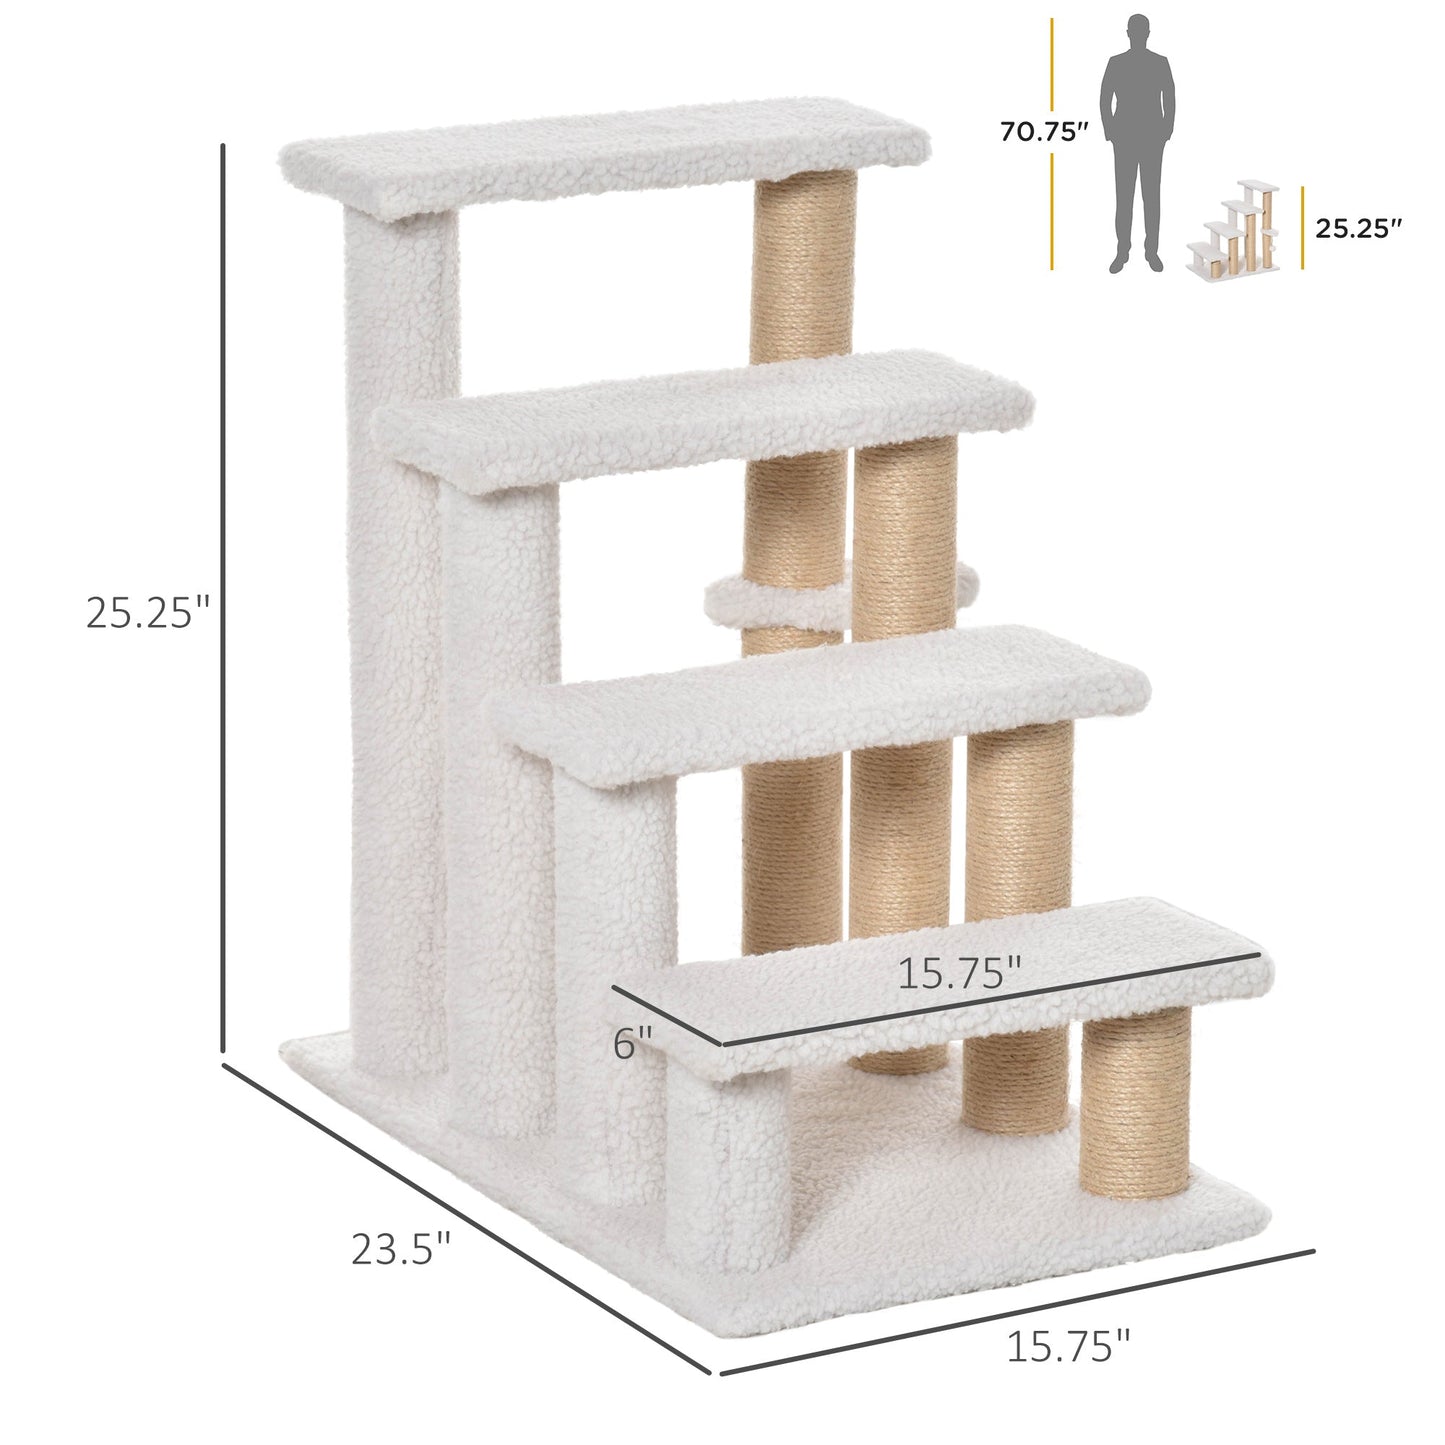 -PawHut 4-Level Pet Stairs, Cat Steps Carpeted Ladder Ramp, Kitten Tree Climber with Scratching Posts, Hanging Play Ball, for Bed, Sofa, White - Outdoor Style Company